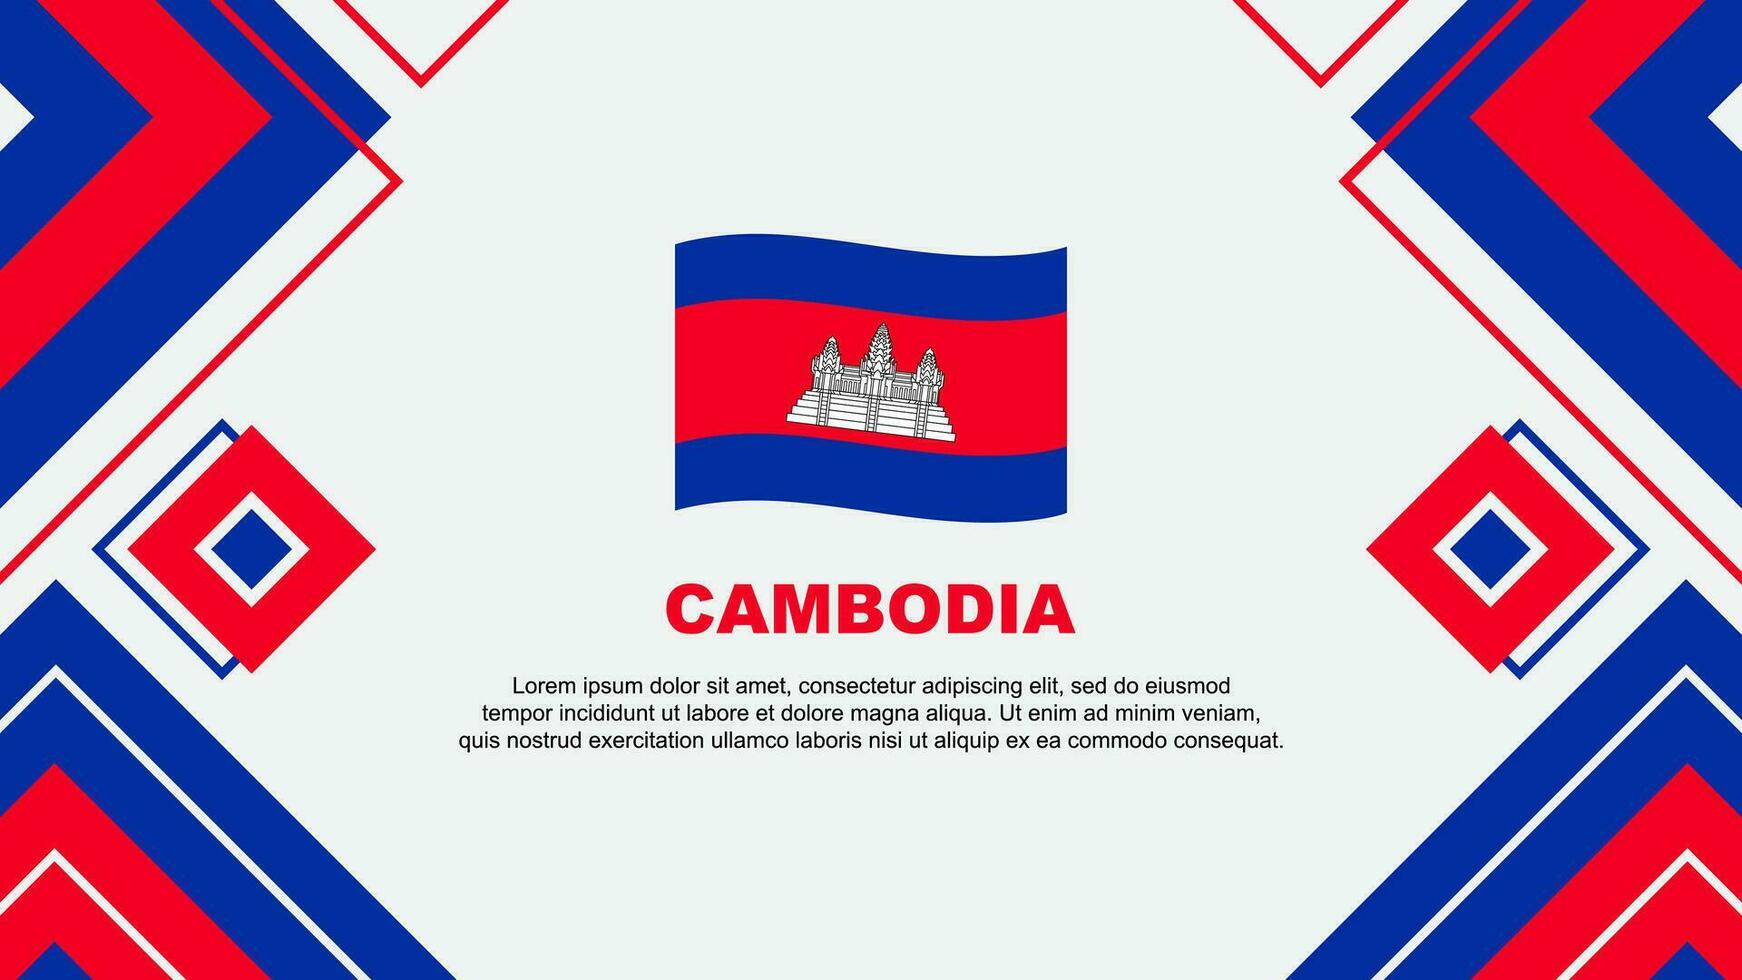 Cambodia Flag Abstract Background Design Template. Cambodia Independence Day Banner Wallpaper Vector Illustration. Cambodia Background